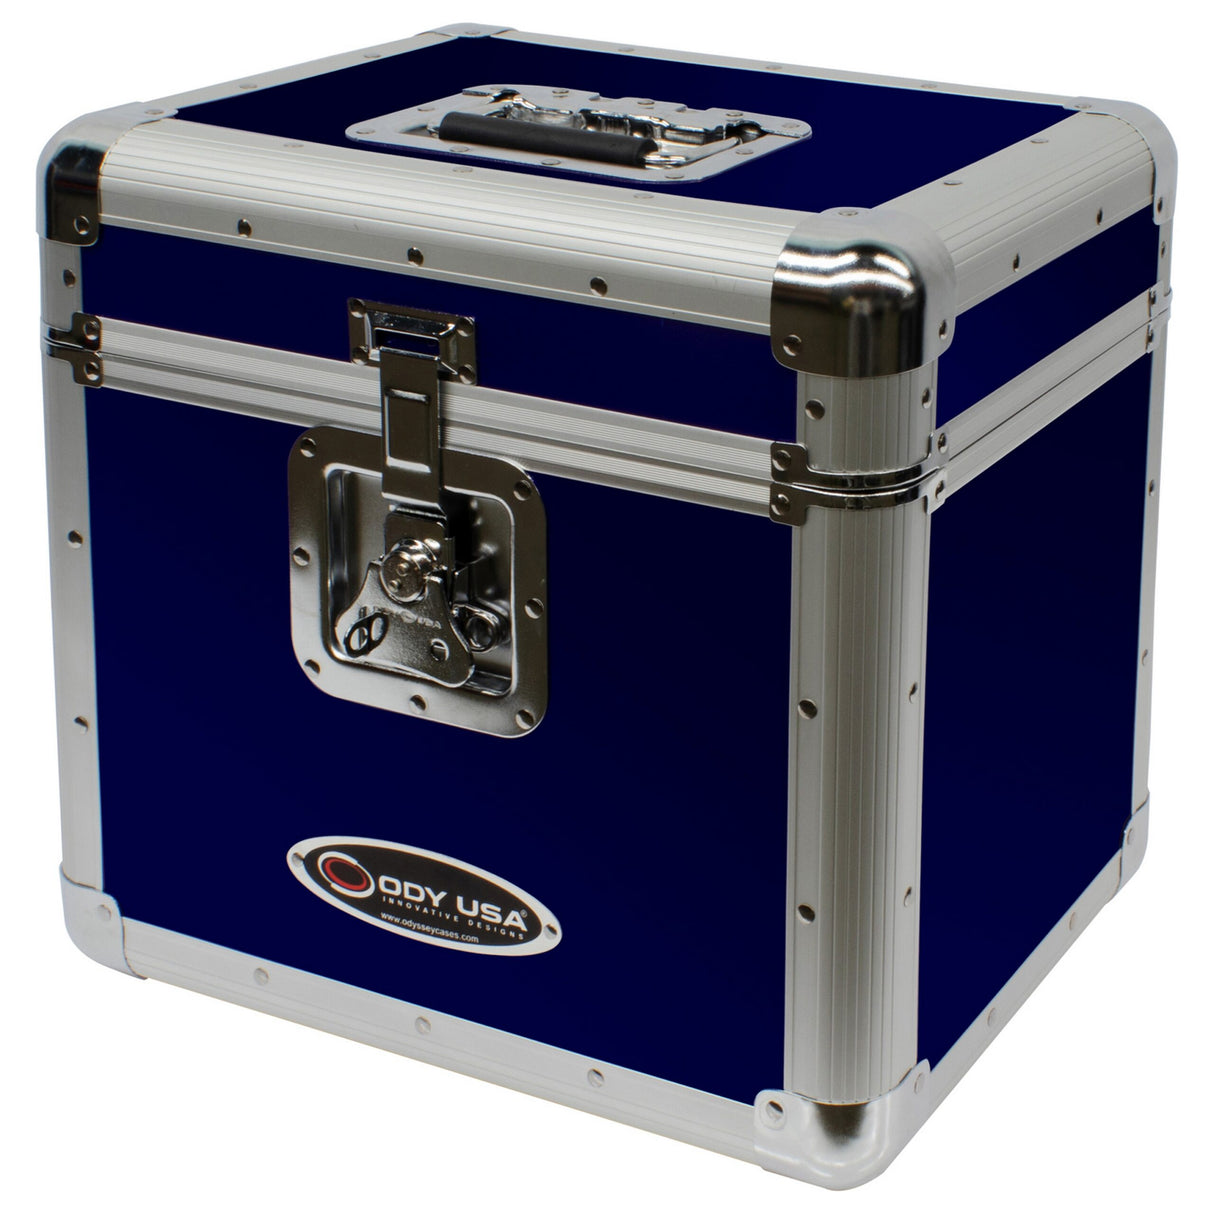 Odyssey KLP2BLU KROM Series Stackable Record/Utility Case for 12-Inch Vinyl Records/LPs, Blue